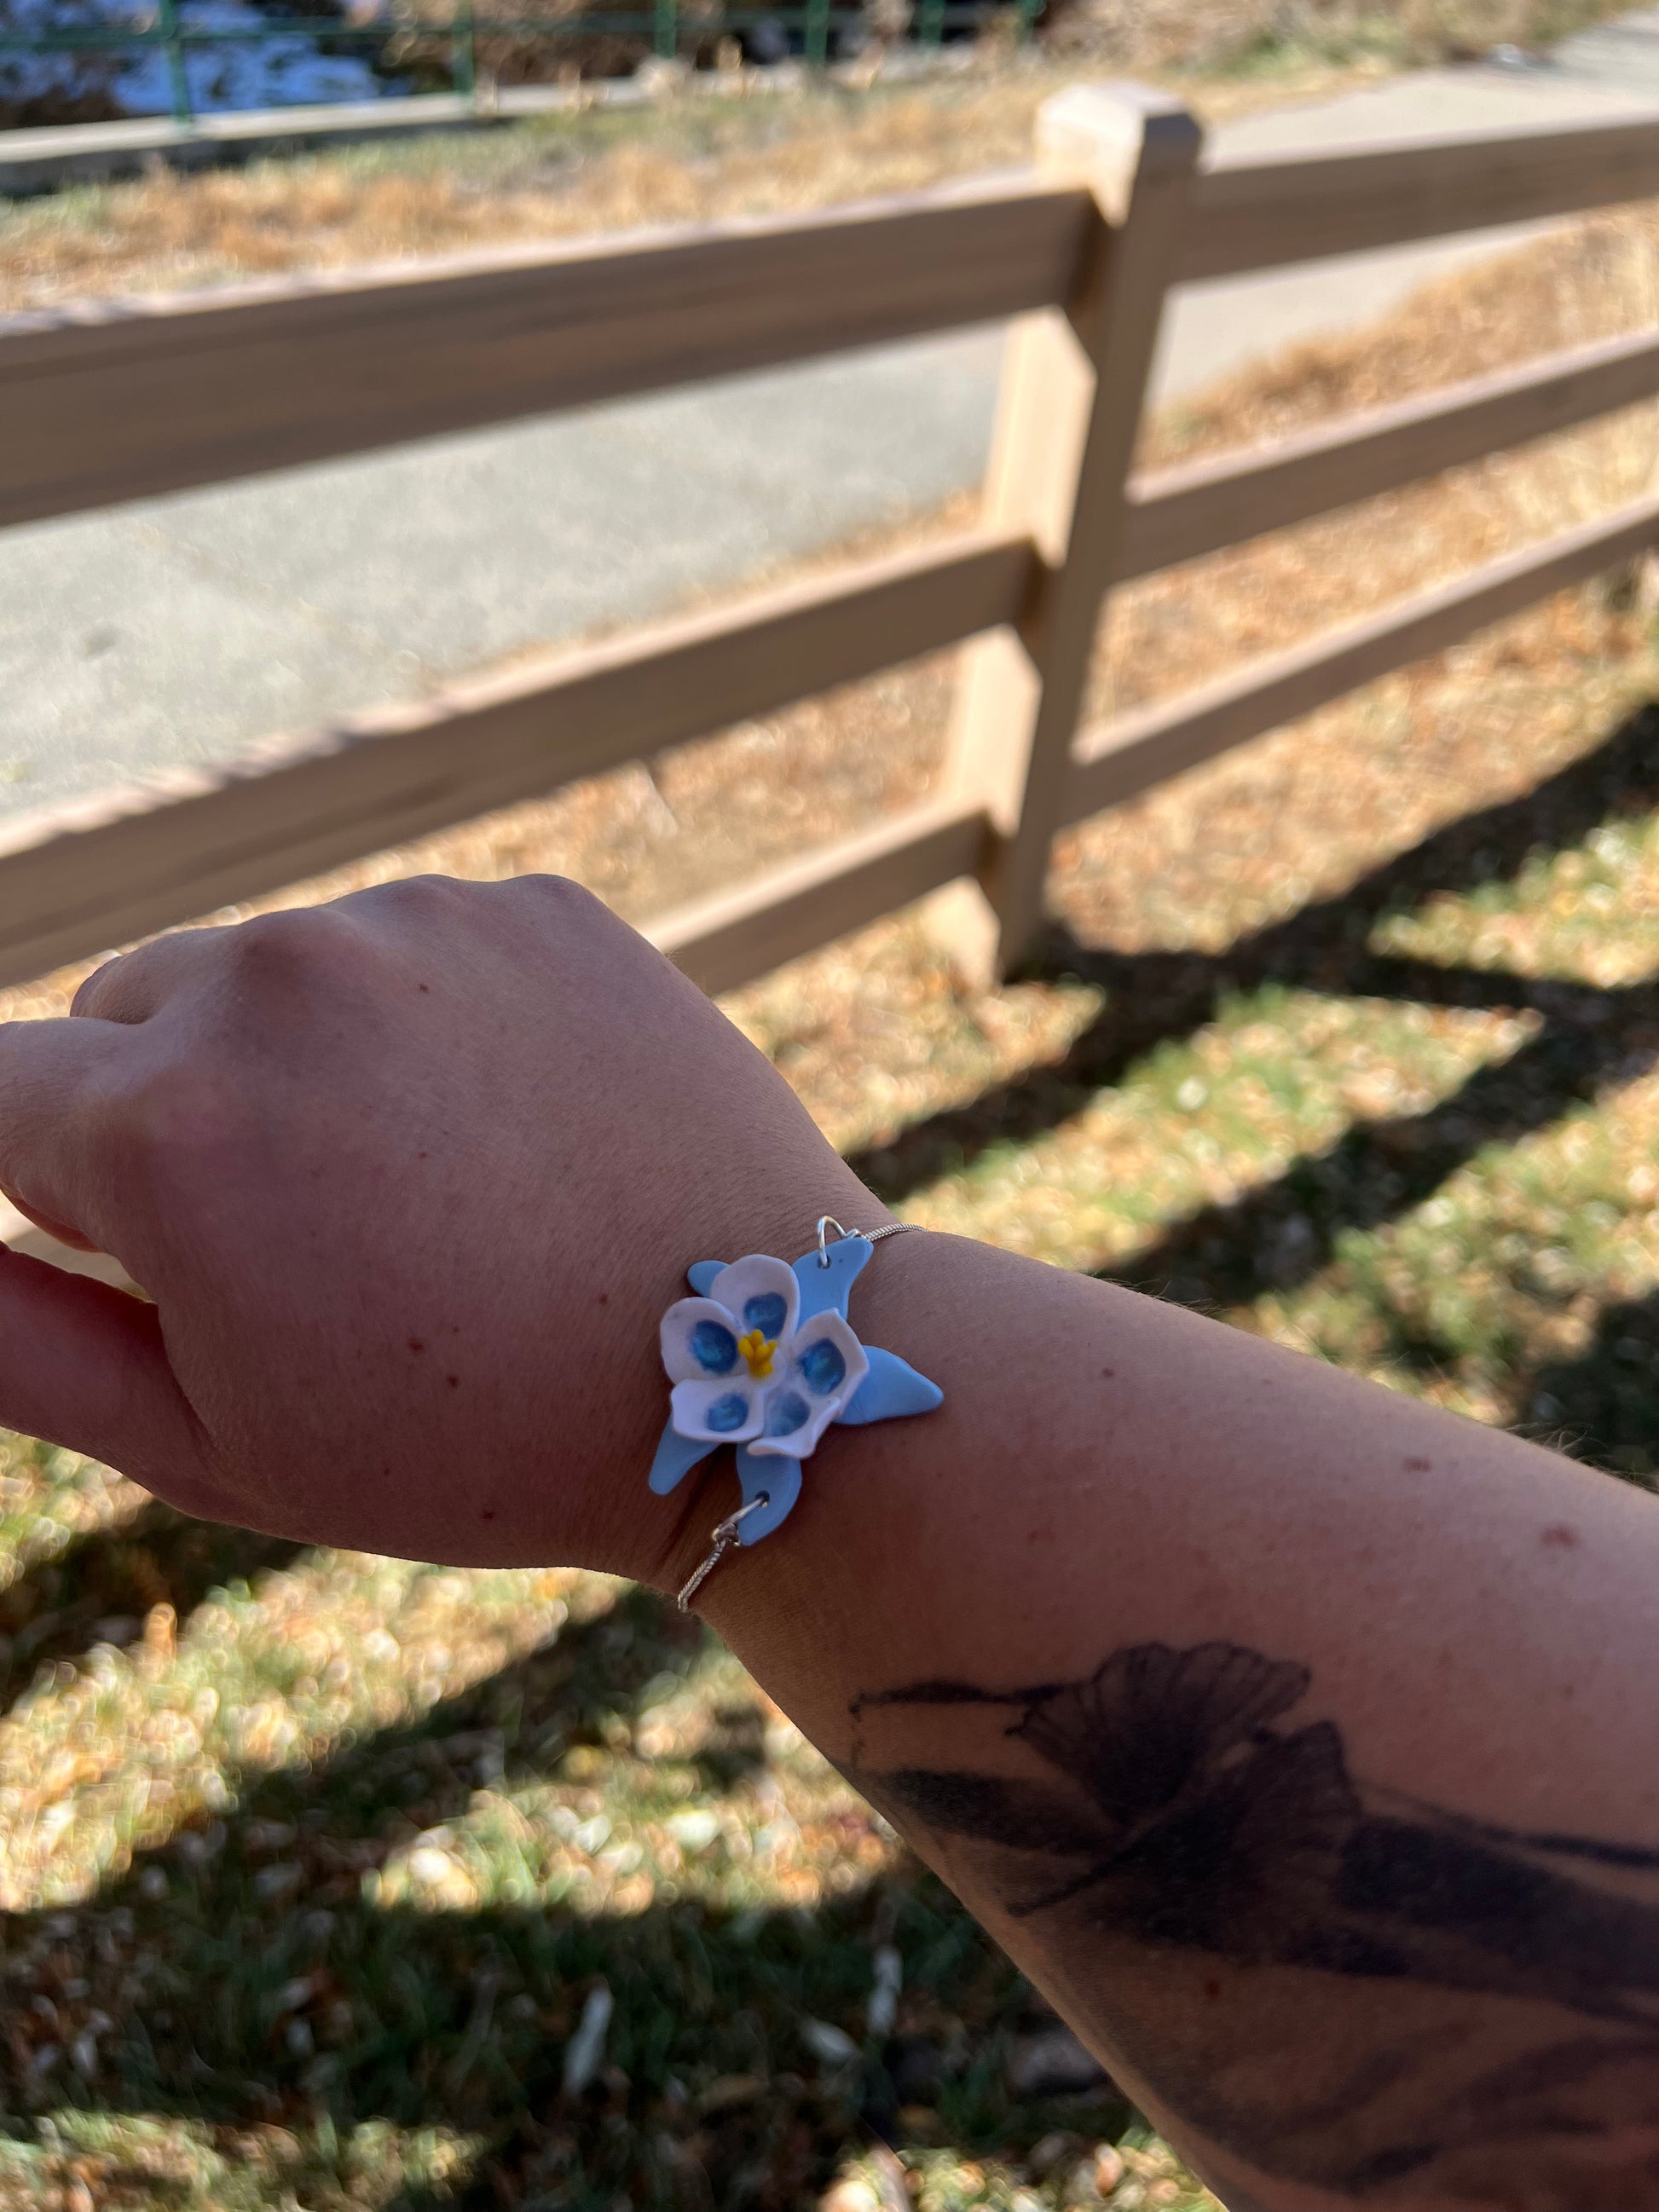 Capture the beauty of Colorado's state flower with our columbine bracelet. Inspired by the rugged landscapes of the Rockies, this bracelet embodies natural elegance and wilderness charm. Perfect for nature lovers and those who cherish the spirit of the Rockies.